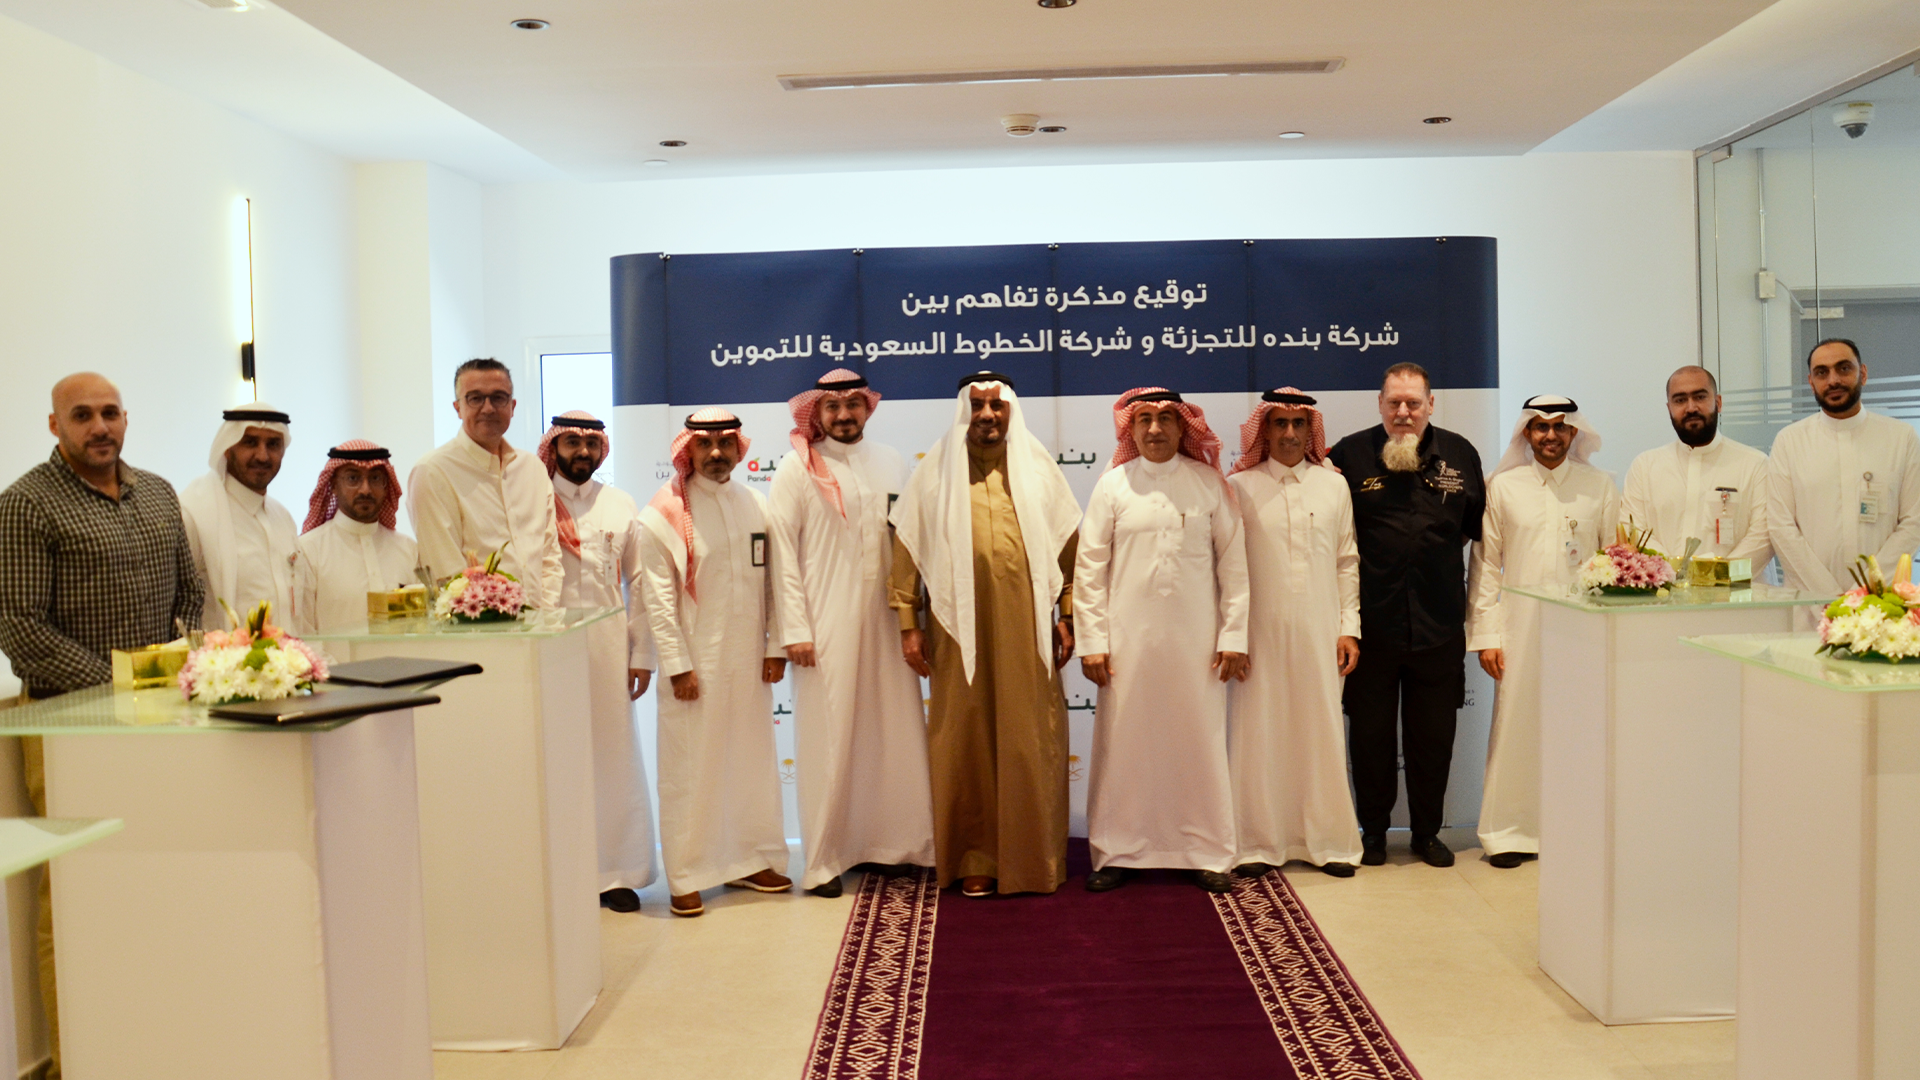 Signing an agreement of understanding between Panda Retail Company and Saudi Airlines Catering Company